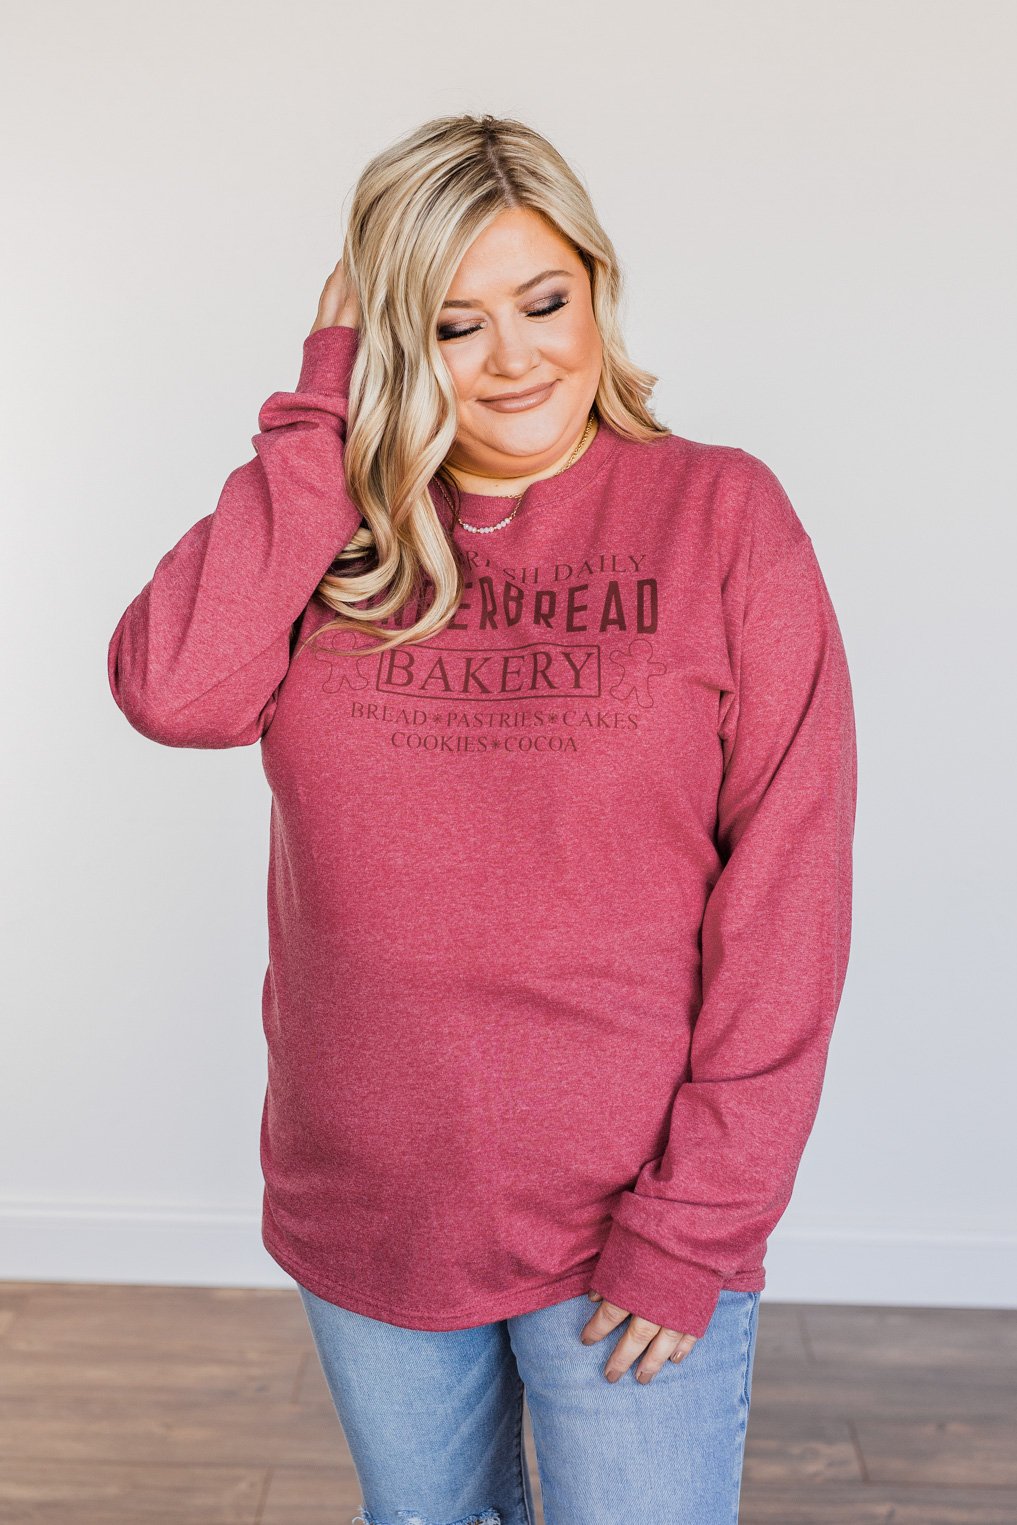 "Gingerbread Bakery" Graphic Long Sleeve Top- Red